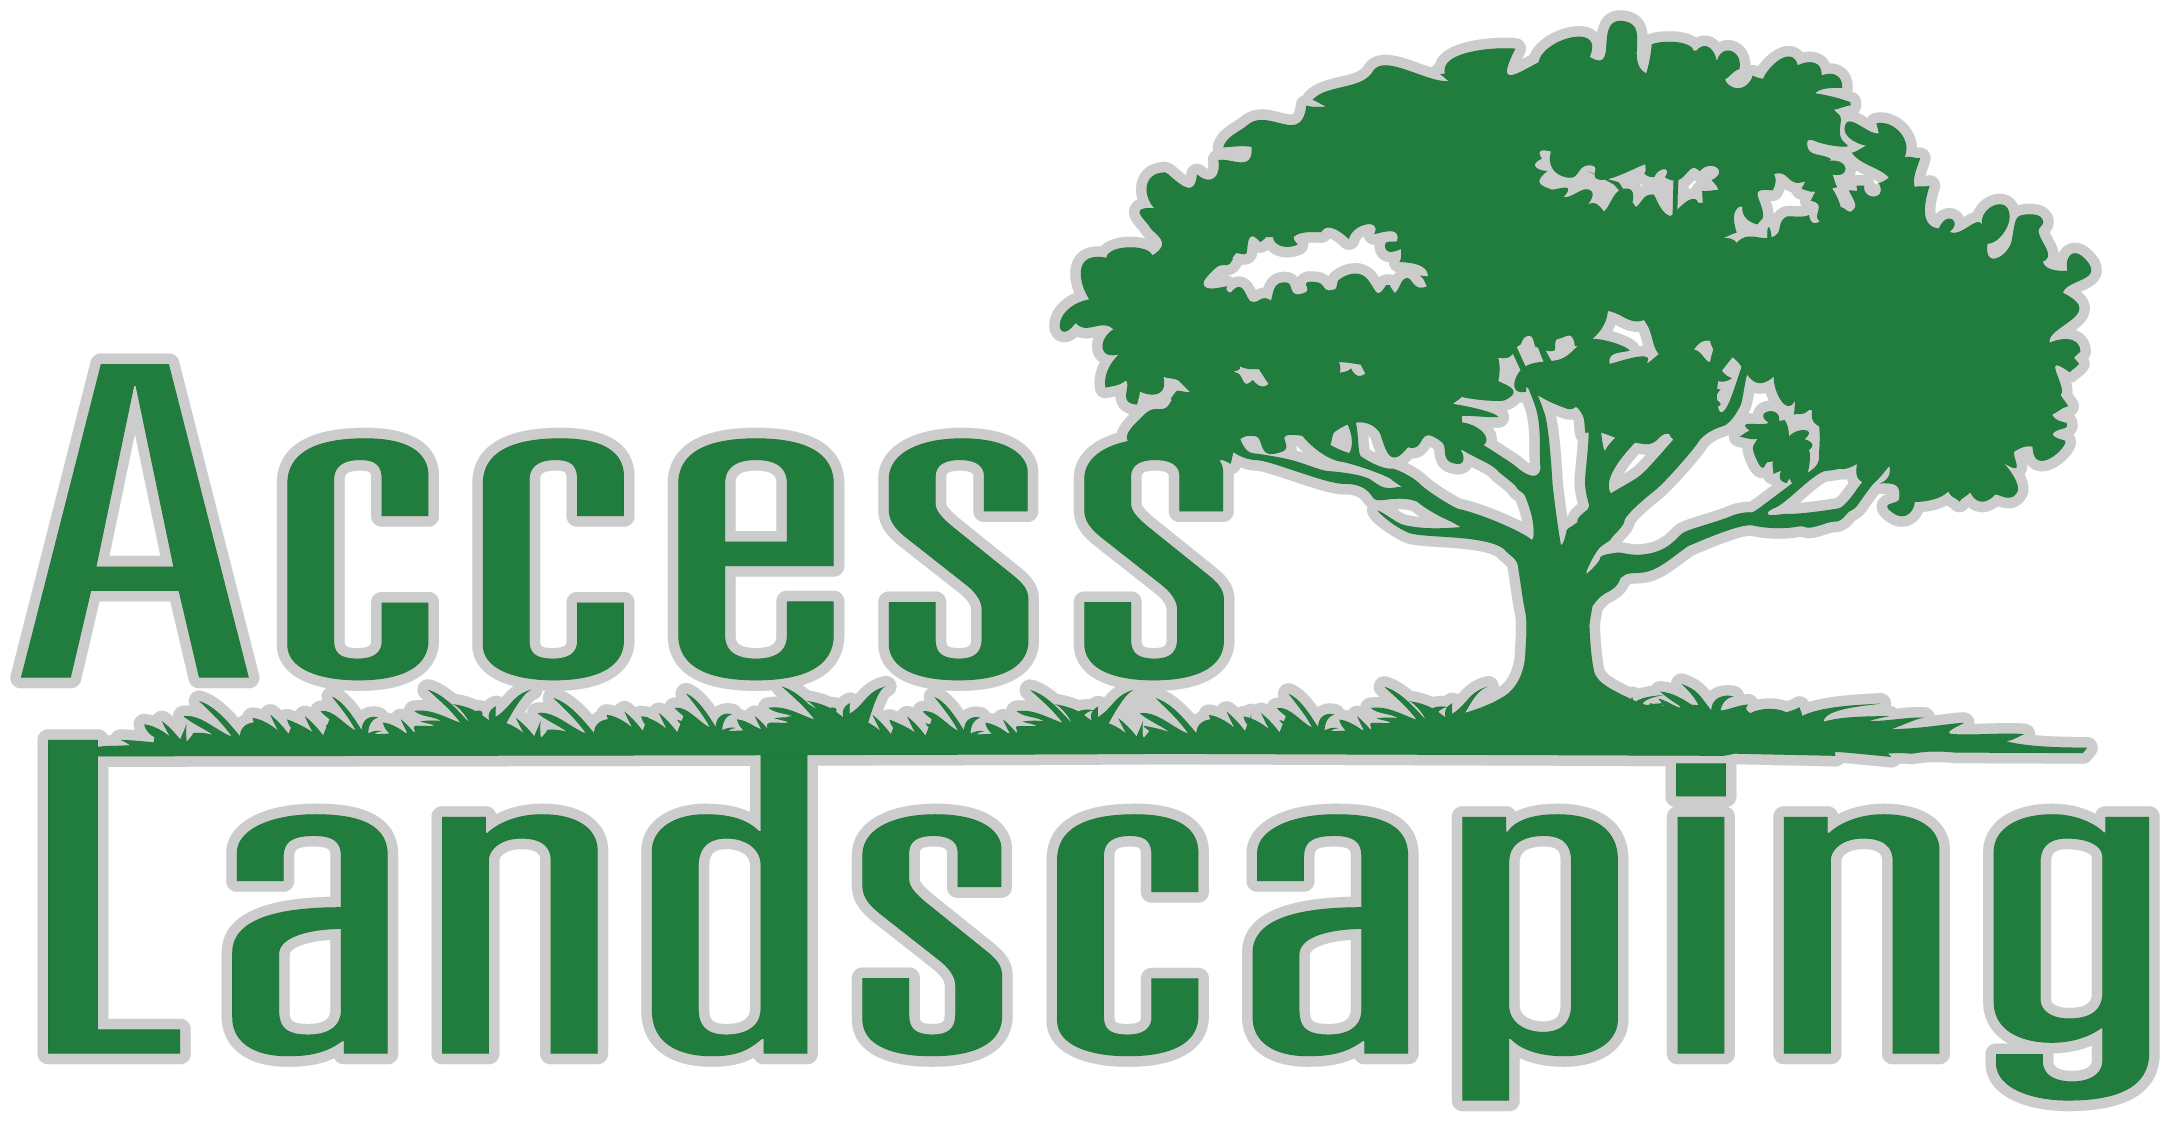 Outdoors clipart lawn care logo, Outdoors lawn care logo.